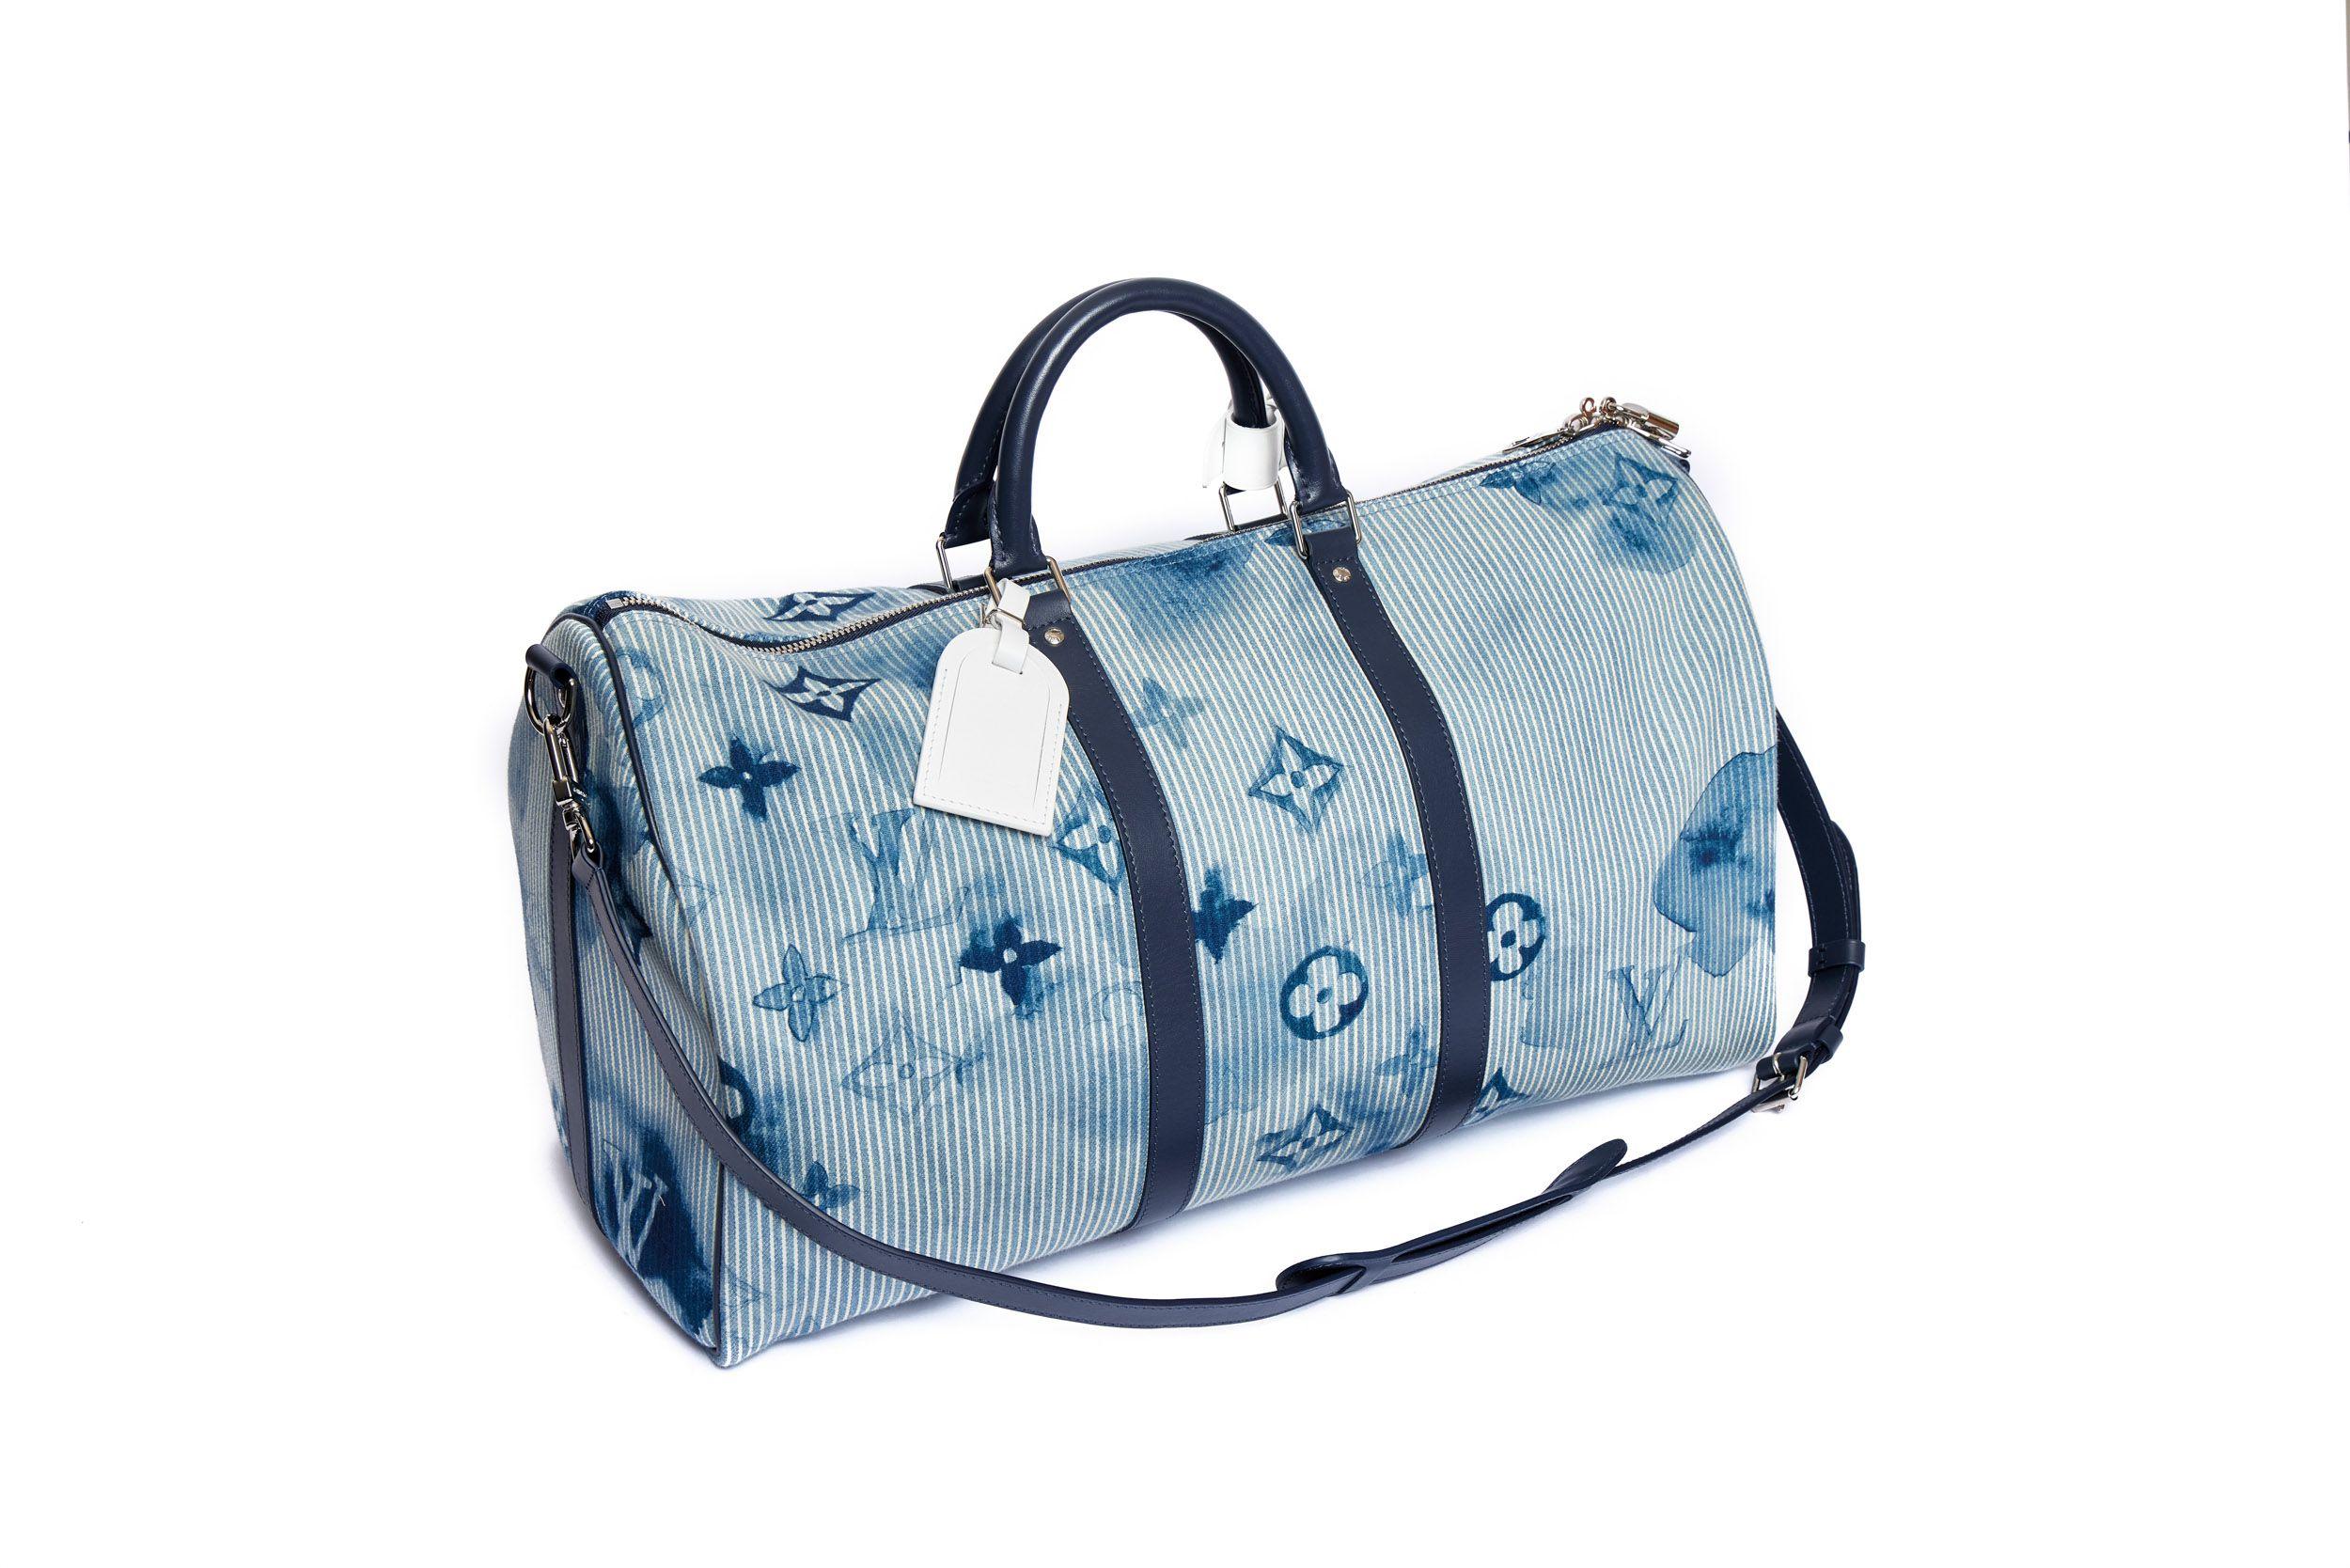 Vuitton Keepall 50 Bandoulière is made from denim hickory fabric with a soft ink blue print of the Monogram pattern. Soft-sided and cabin-friendly Blue cotton whit white strips. Blue leather double top handle. Adjustable and detachable blue leather